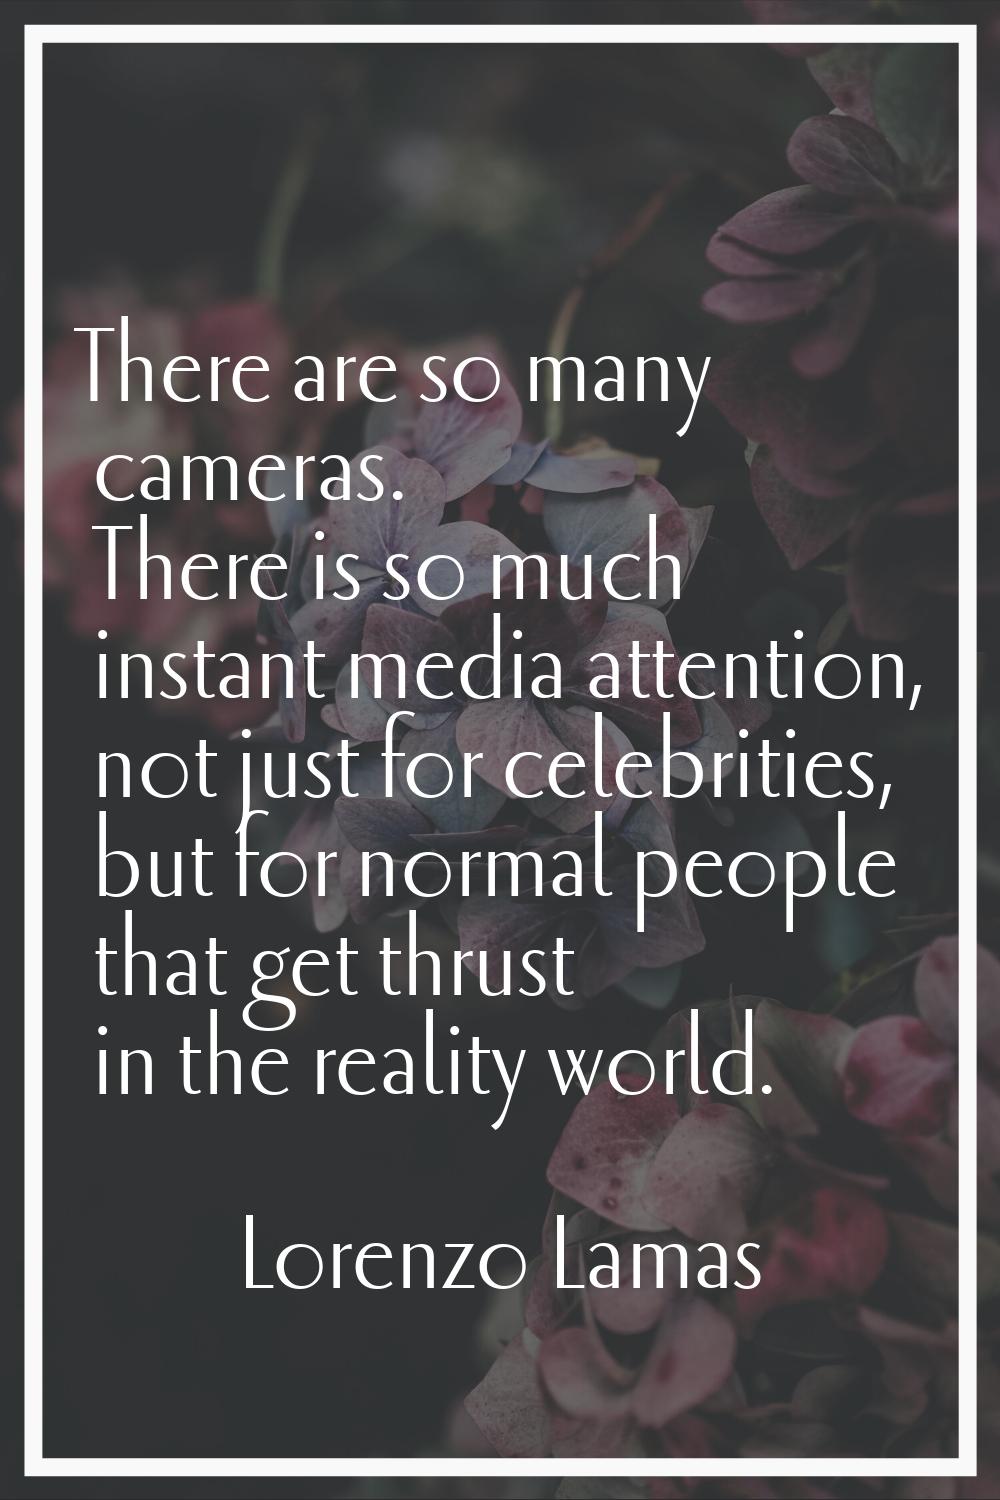 There are so many cameras. There is so much instant media attention, not just for celebrities, but 